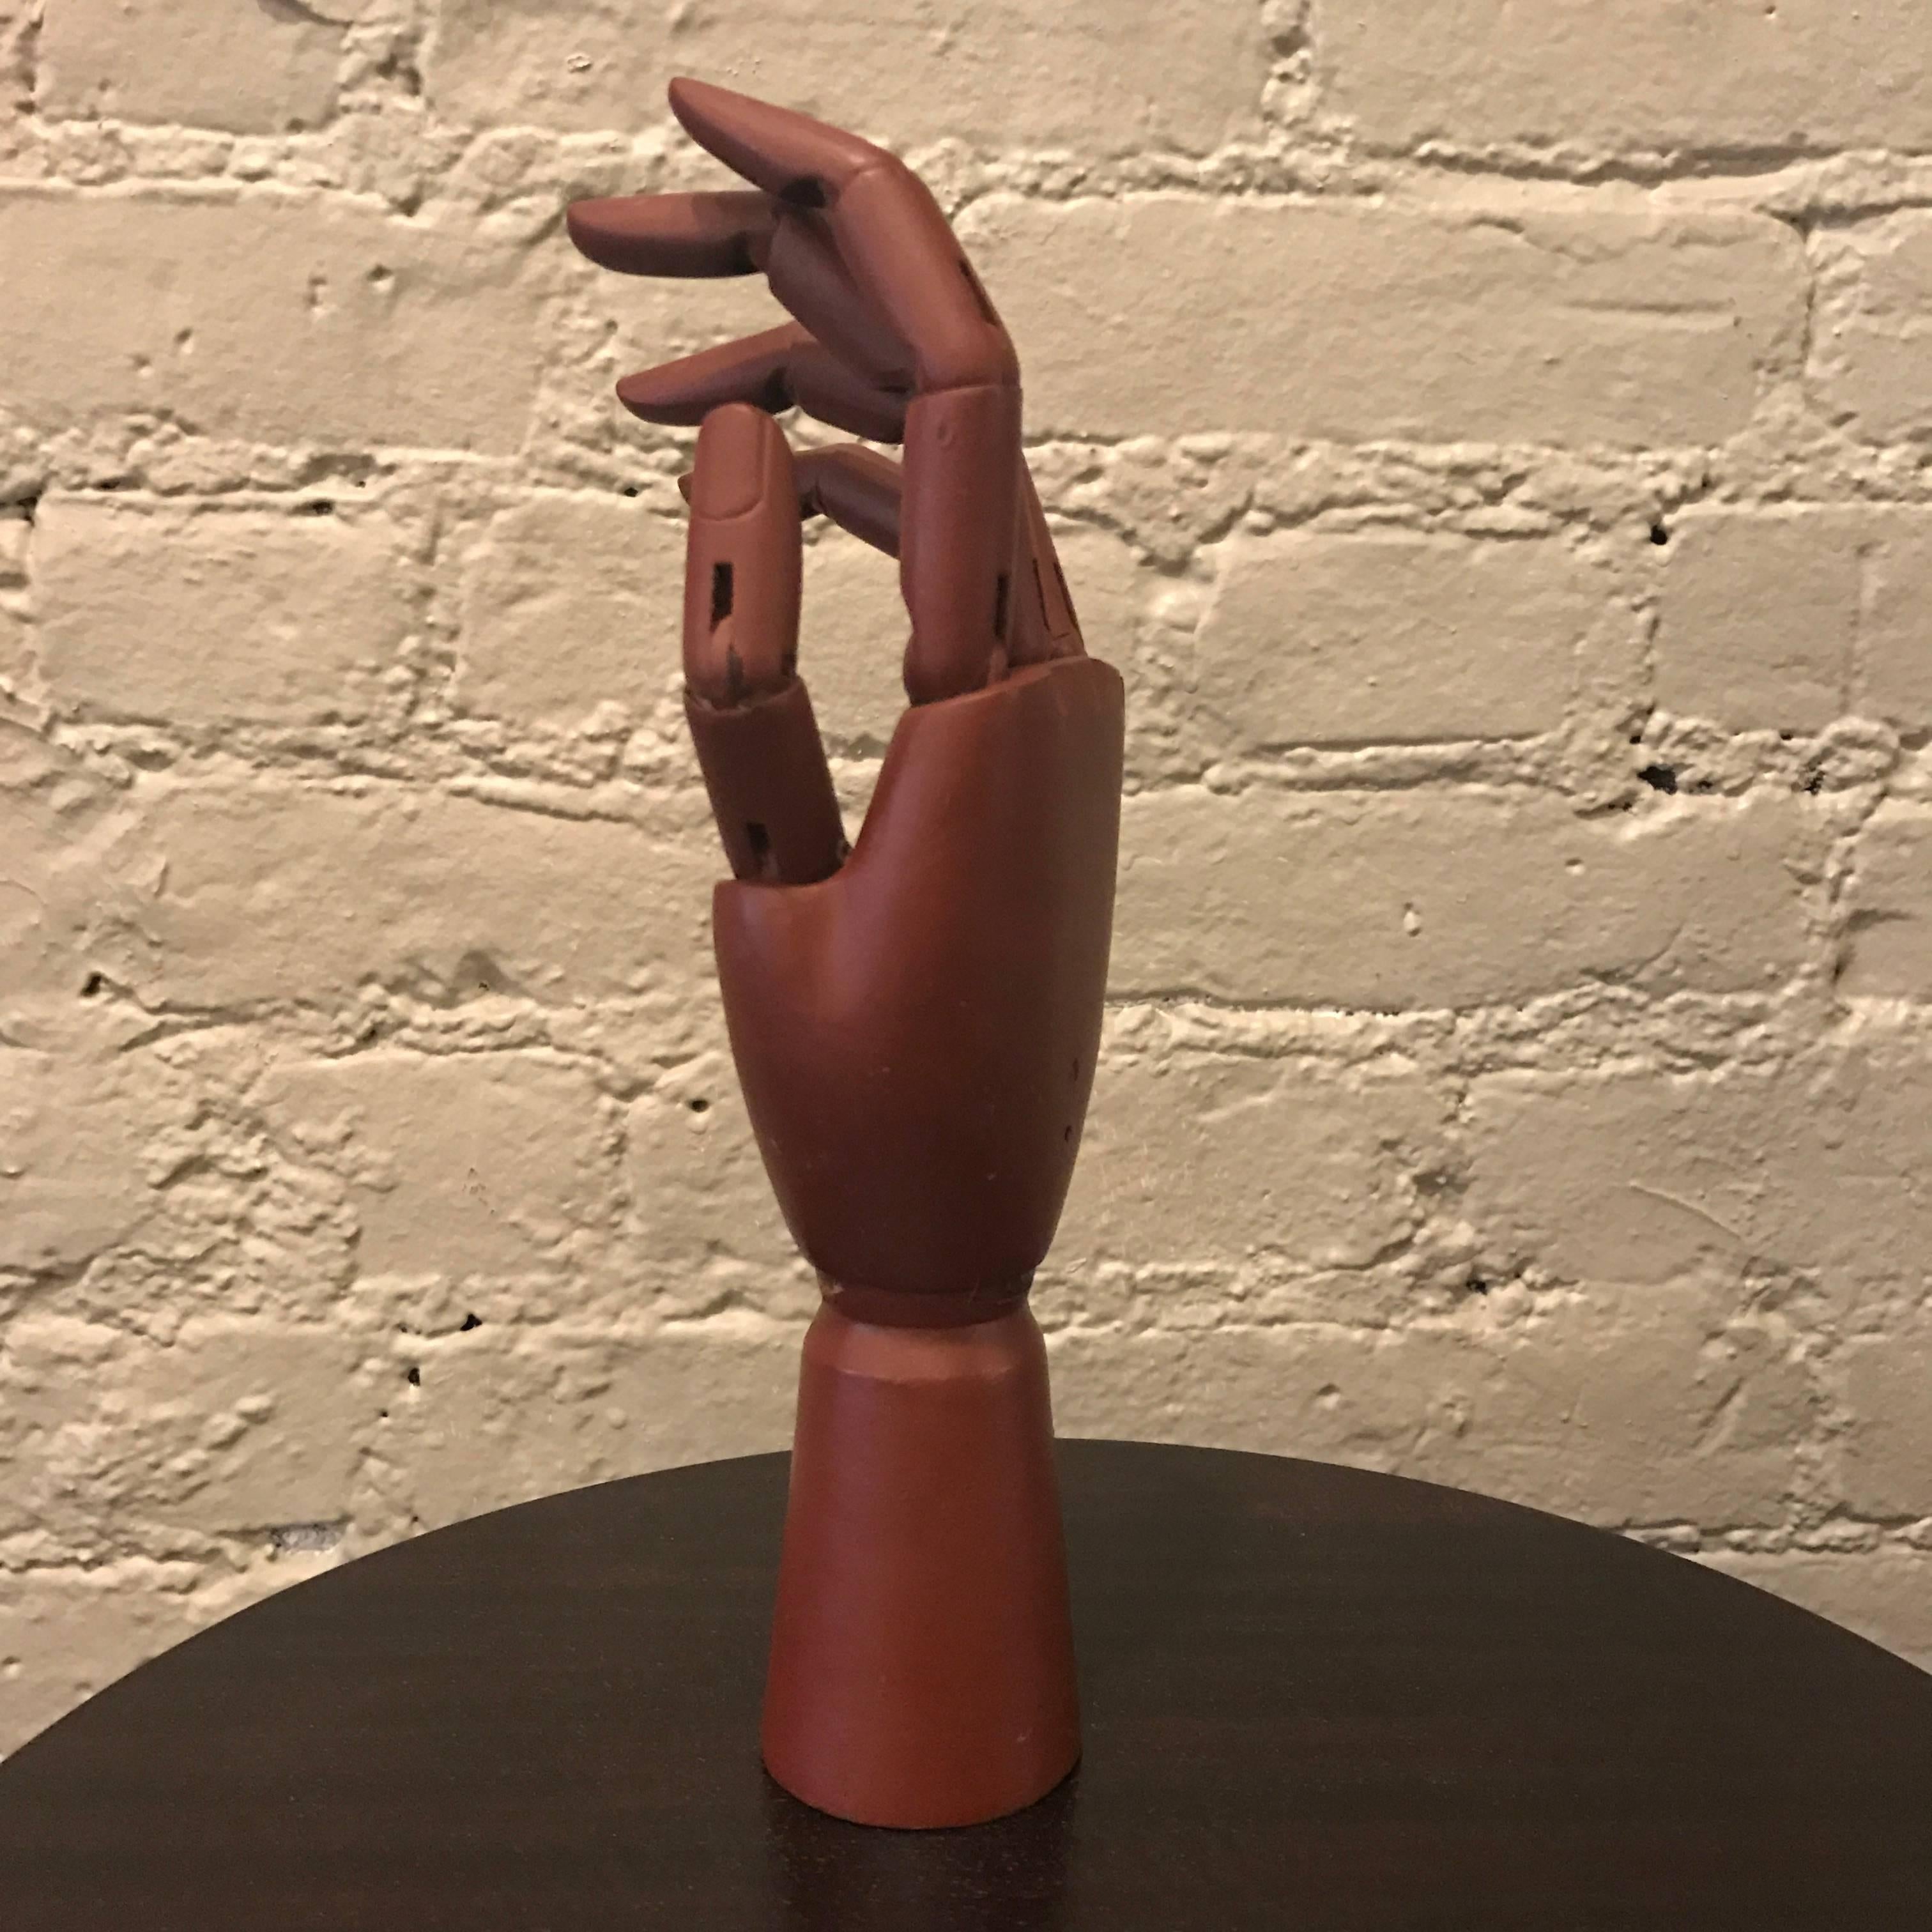 Articulating, mahogany, artist's hand model fully articulates at each joint.